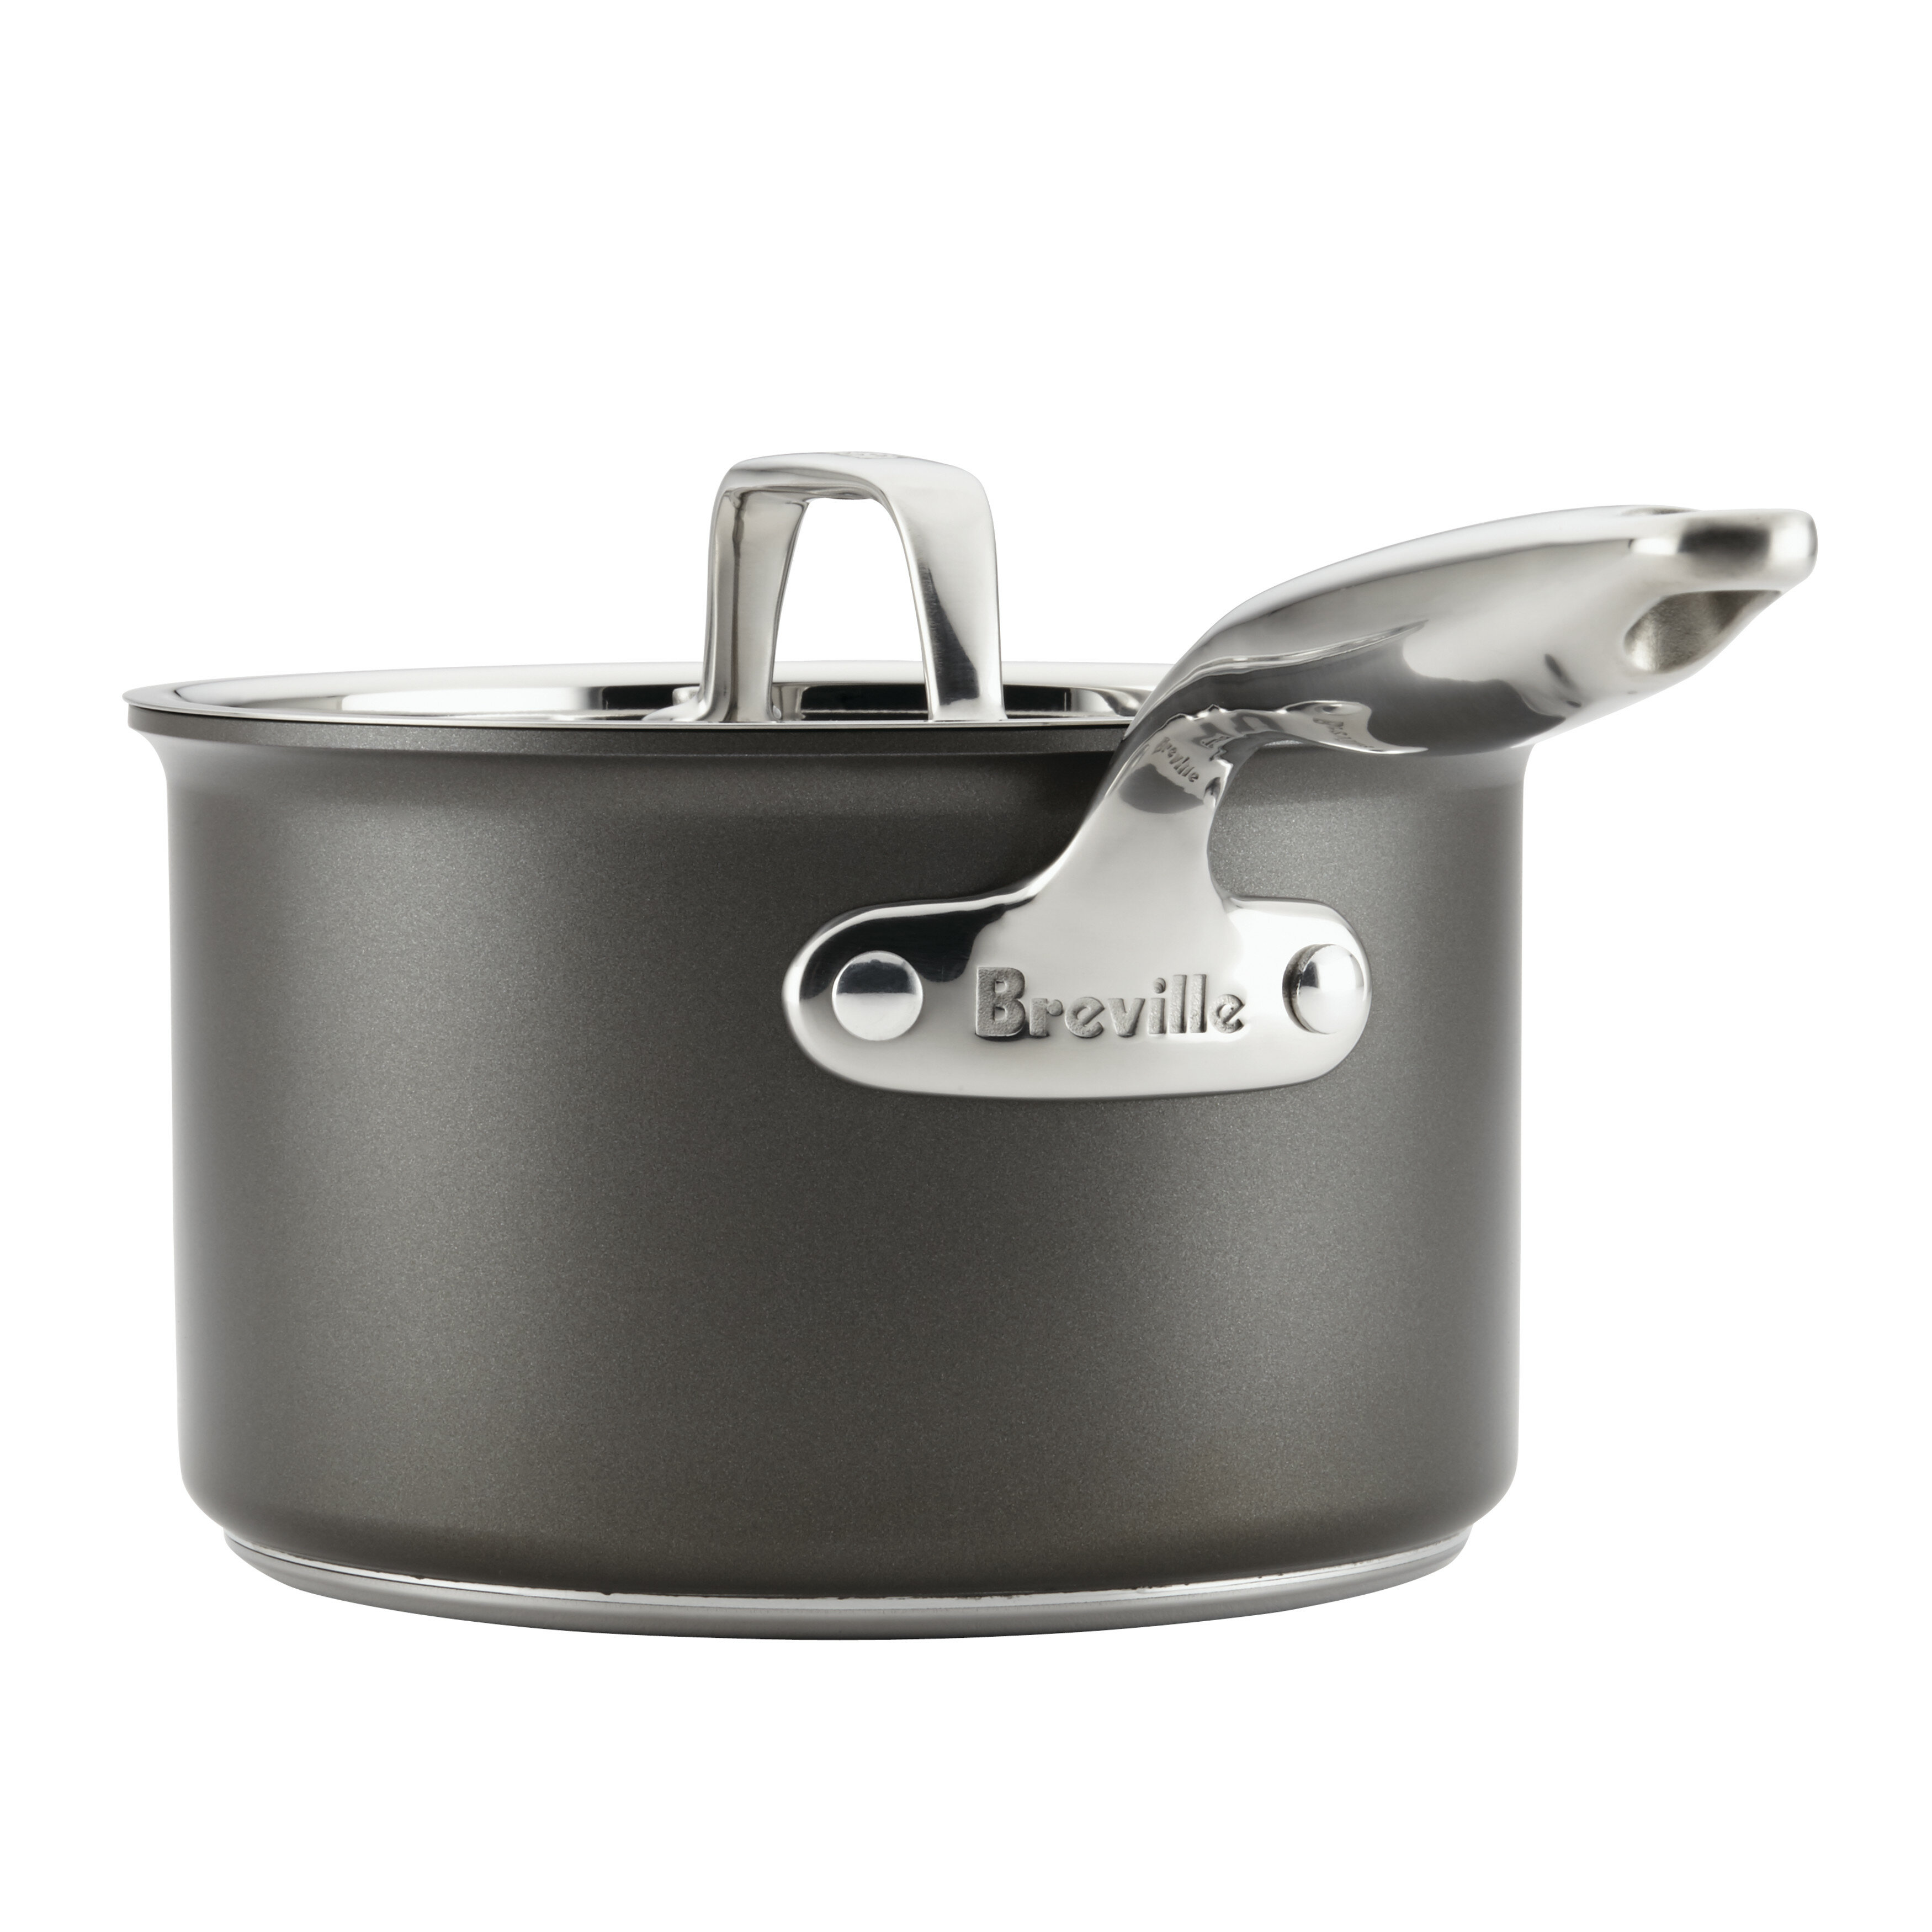  Breville Thermal Pro Stainless Steel Sauce Pan/Saucepan with Lid,  2 Quart, Silver: Home & Kitchen